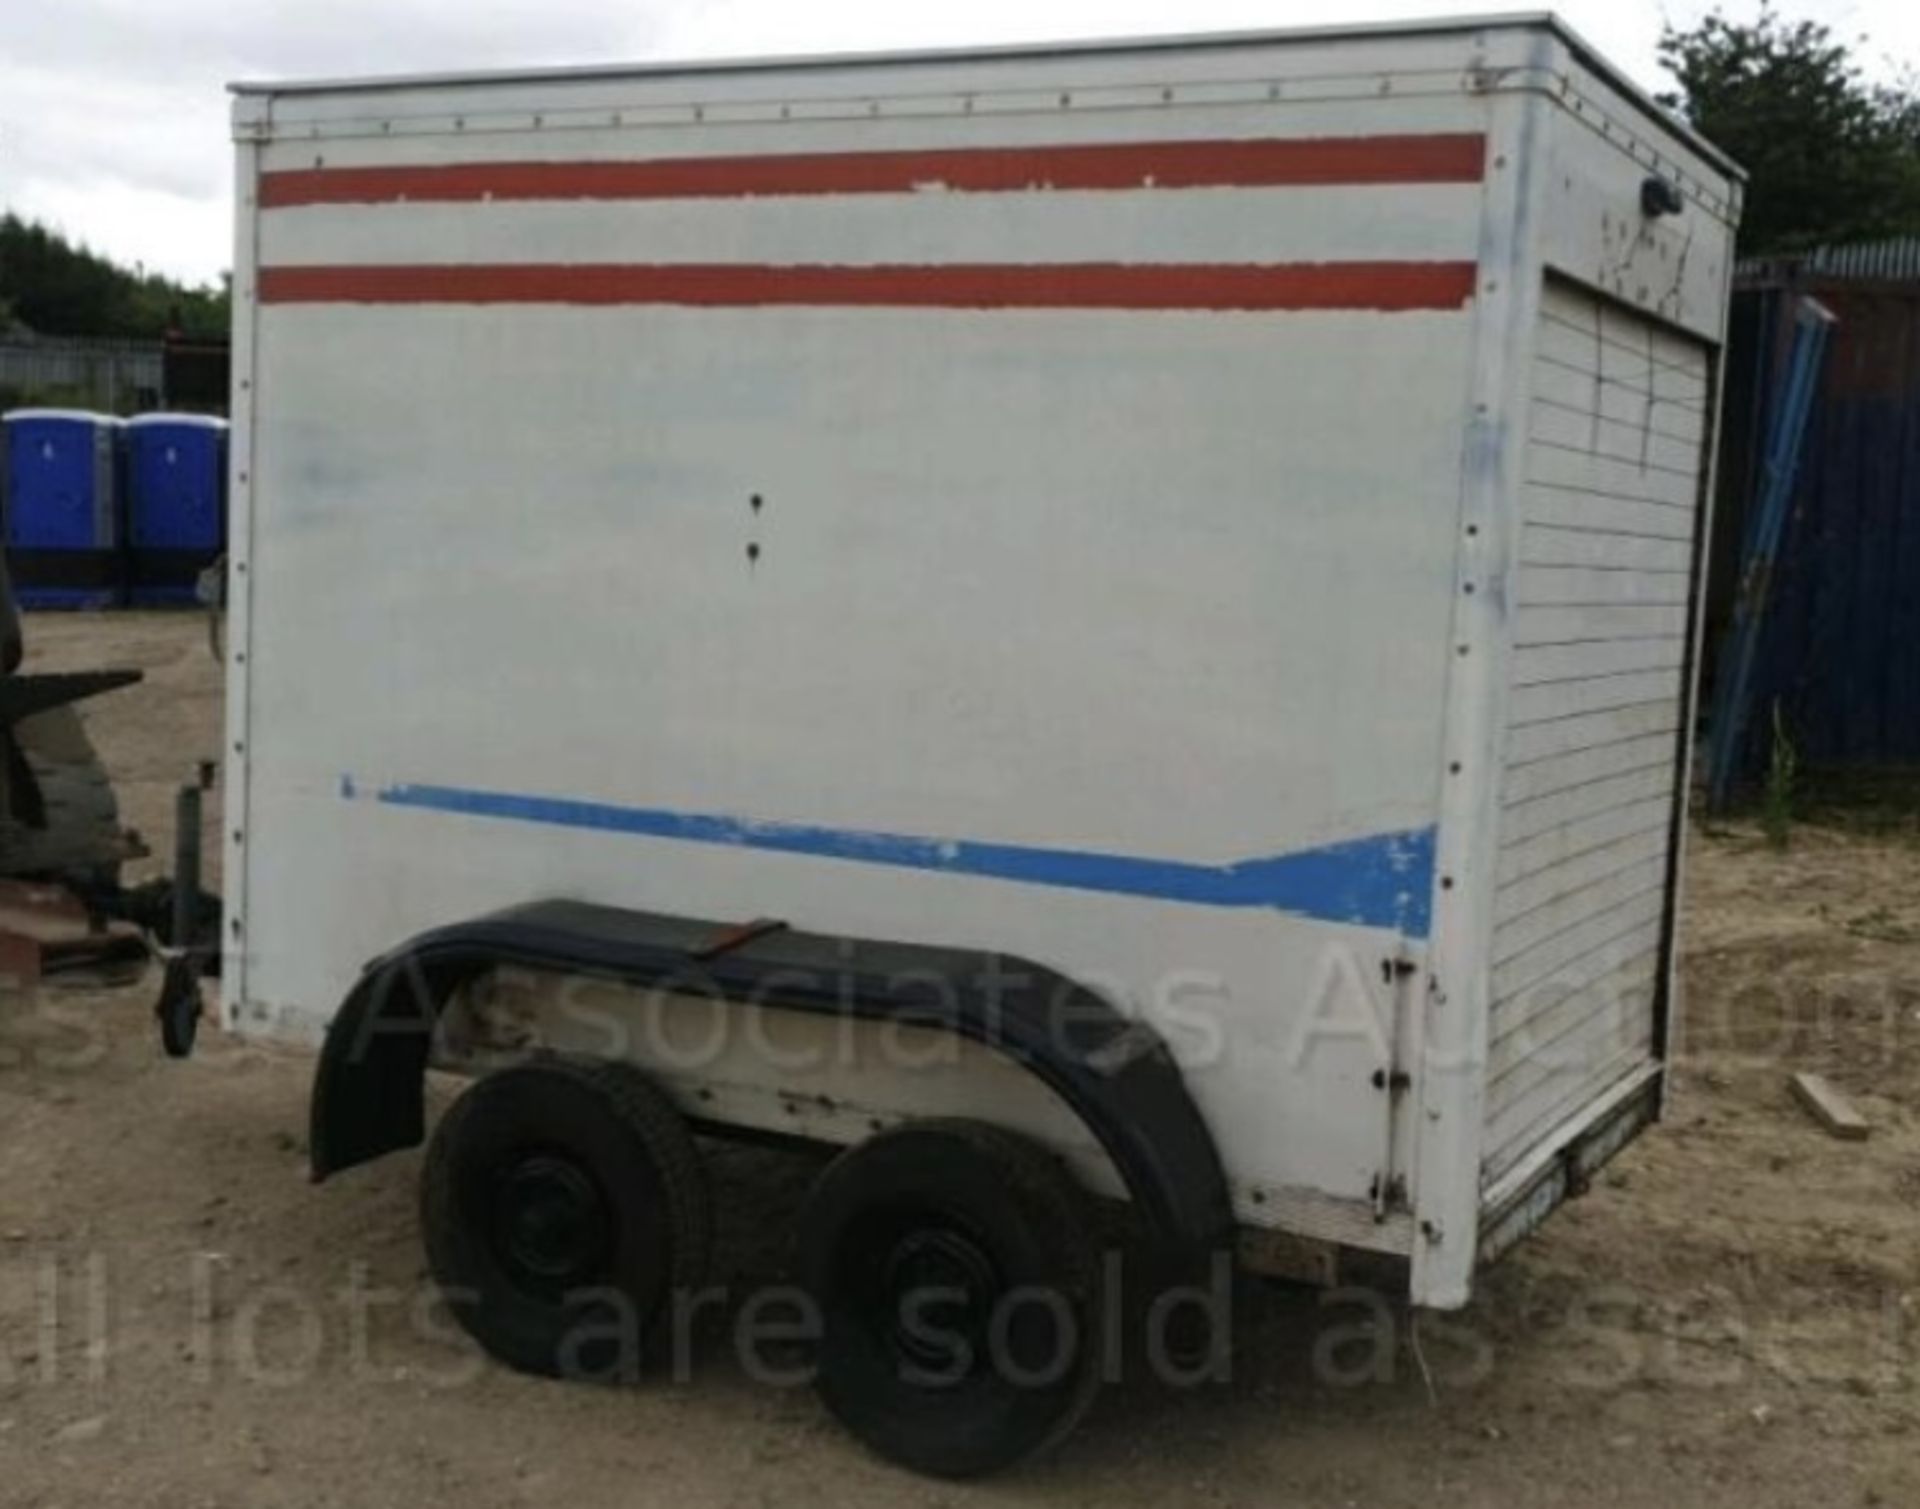 INDESPENSION TWIN AXLE BOX TRAILER TOW VAN *LOCATION NORTH YORKSHIRE* - Image 2 of 4